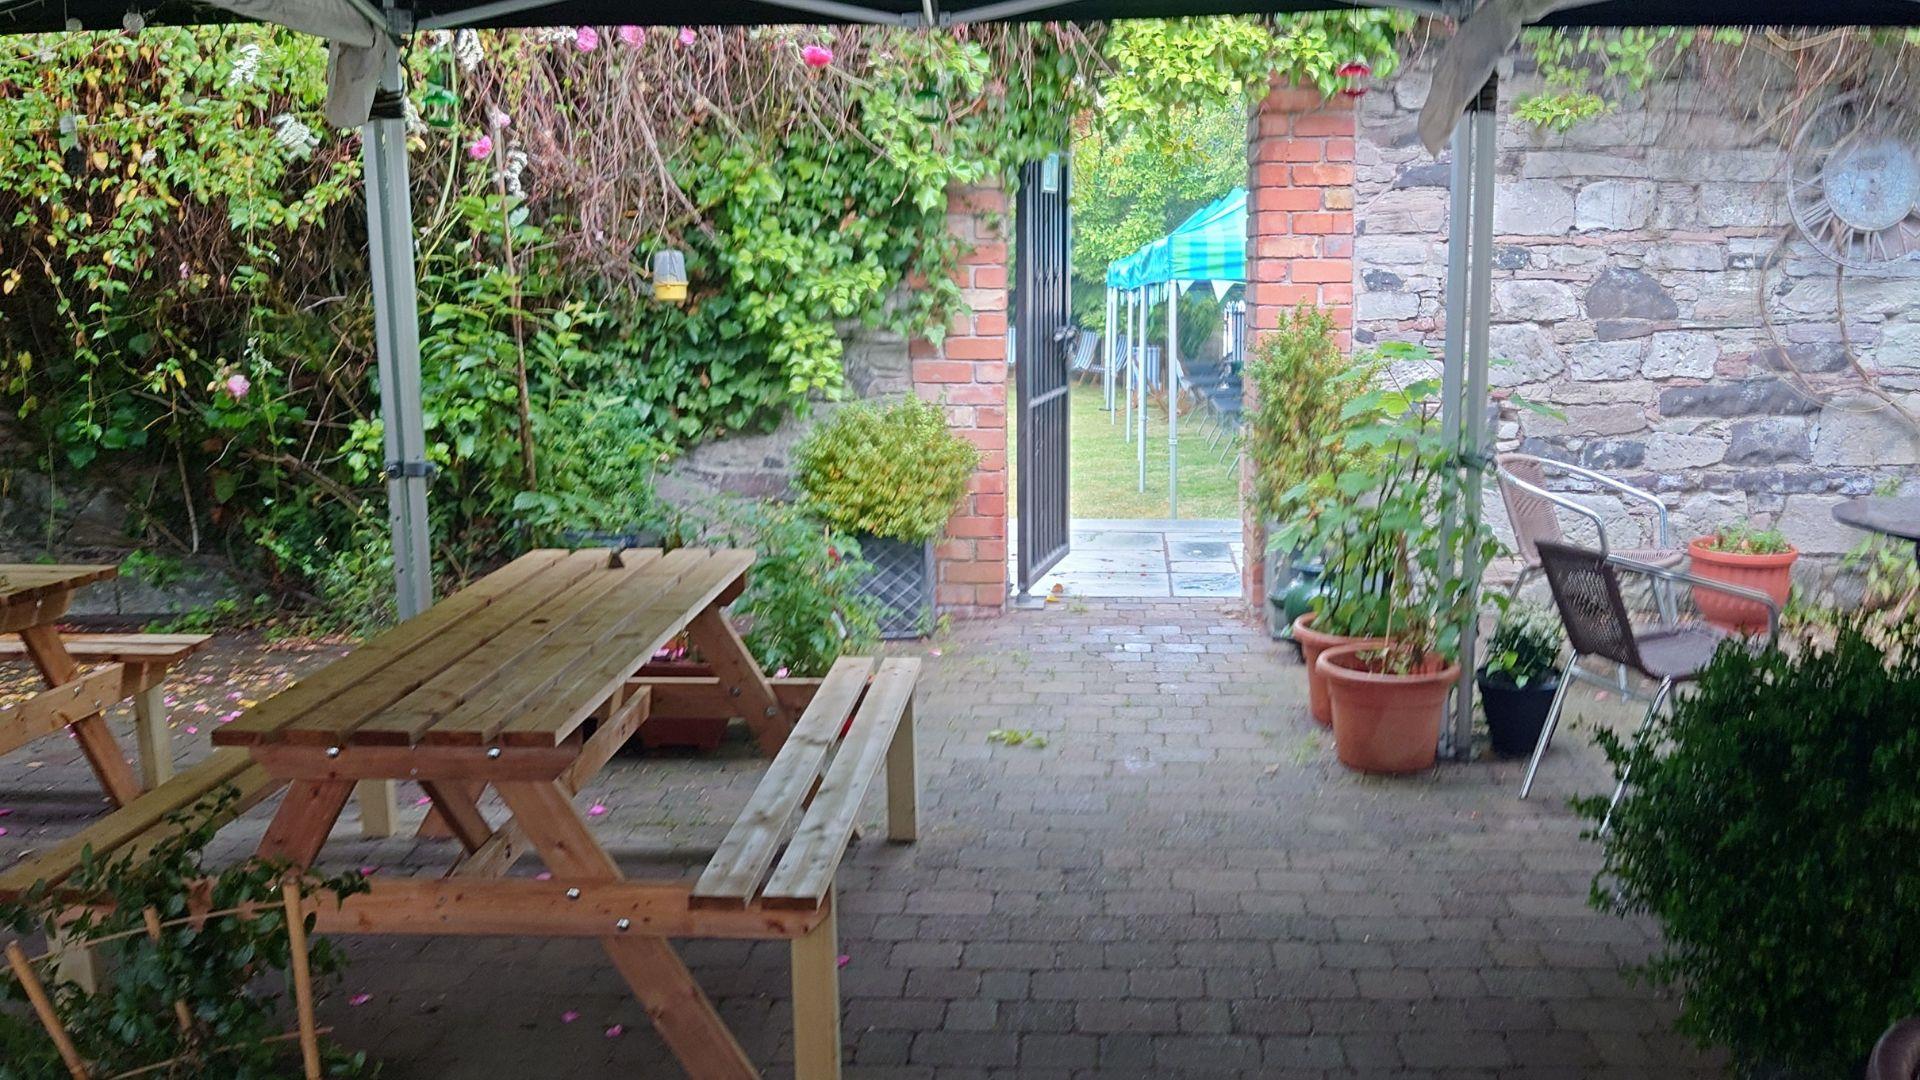 Exterior of No. 14 Georgian House Comber, looking from Courtyard into the Walled Garden, with picnic benches and shrubbery in view